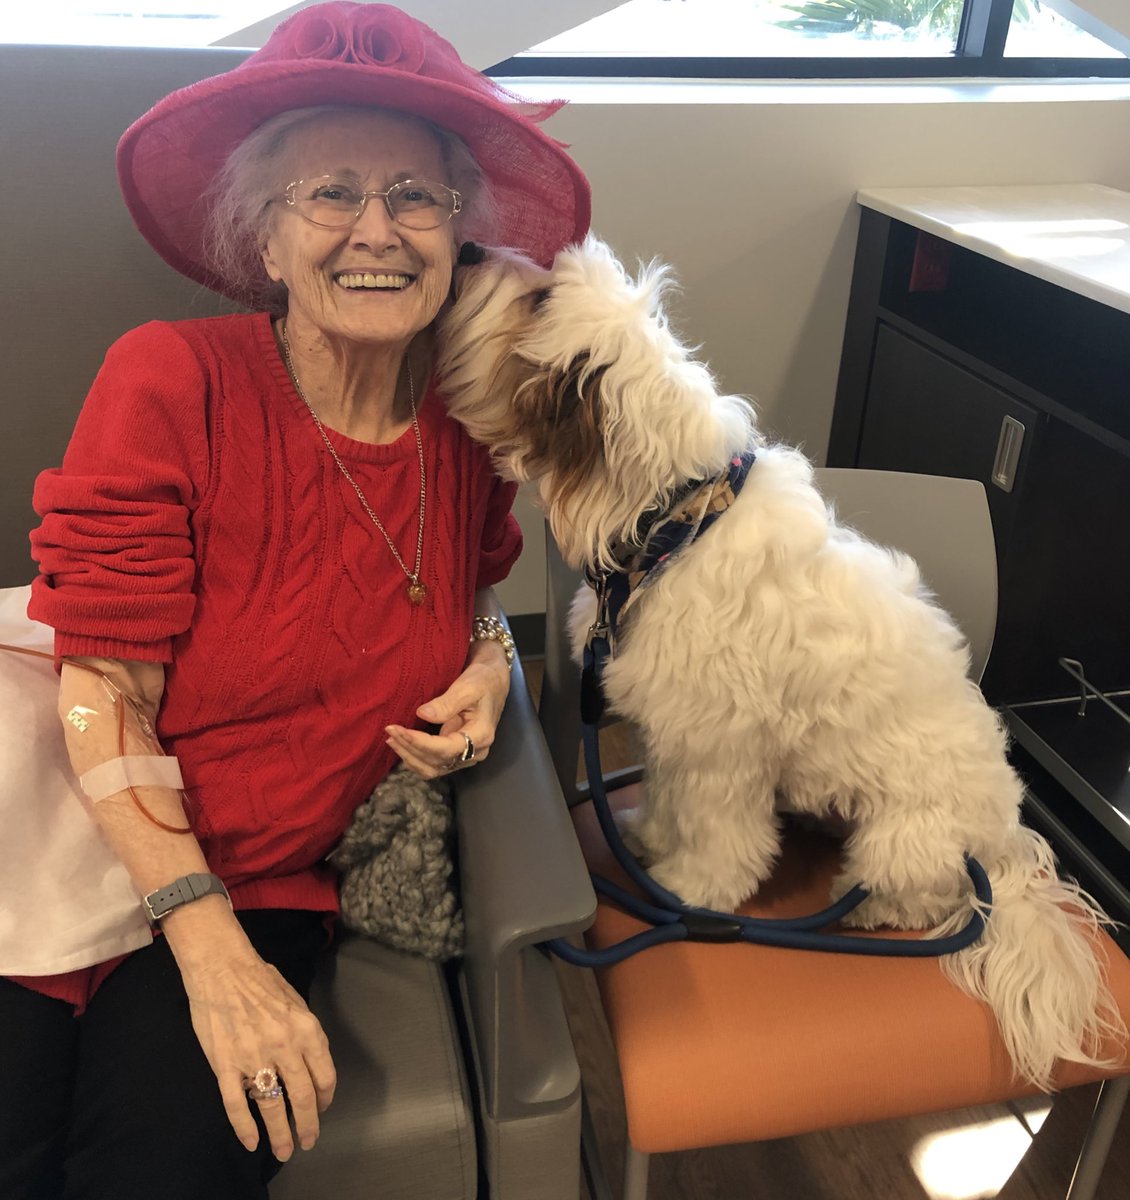 I went with my grandma to the doctor’s to practice for my #therapydog testing. My first of 5 tests is this Saturday! So nervous because sometimes I still like to give kisses to unsuspecting friends! Luckily, my grandma doesn’t mind! #futuretherapydog #dogsoflasvegas